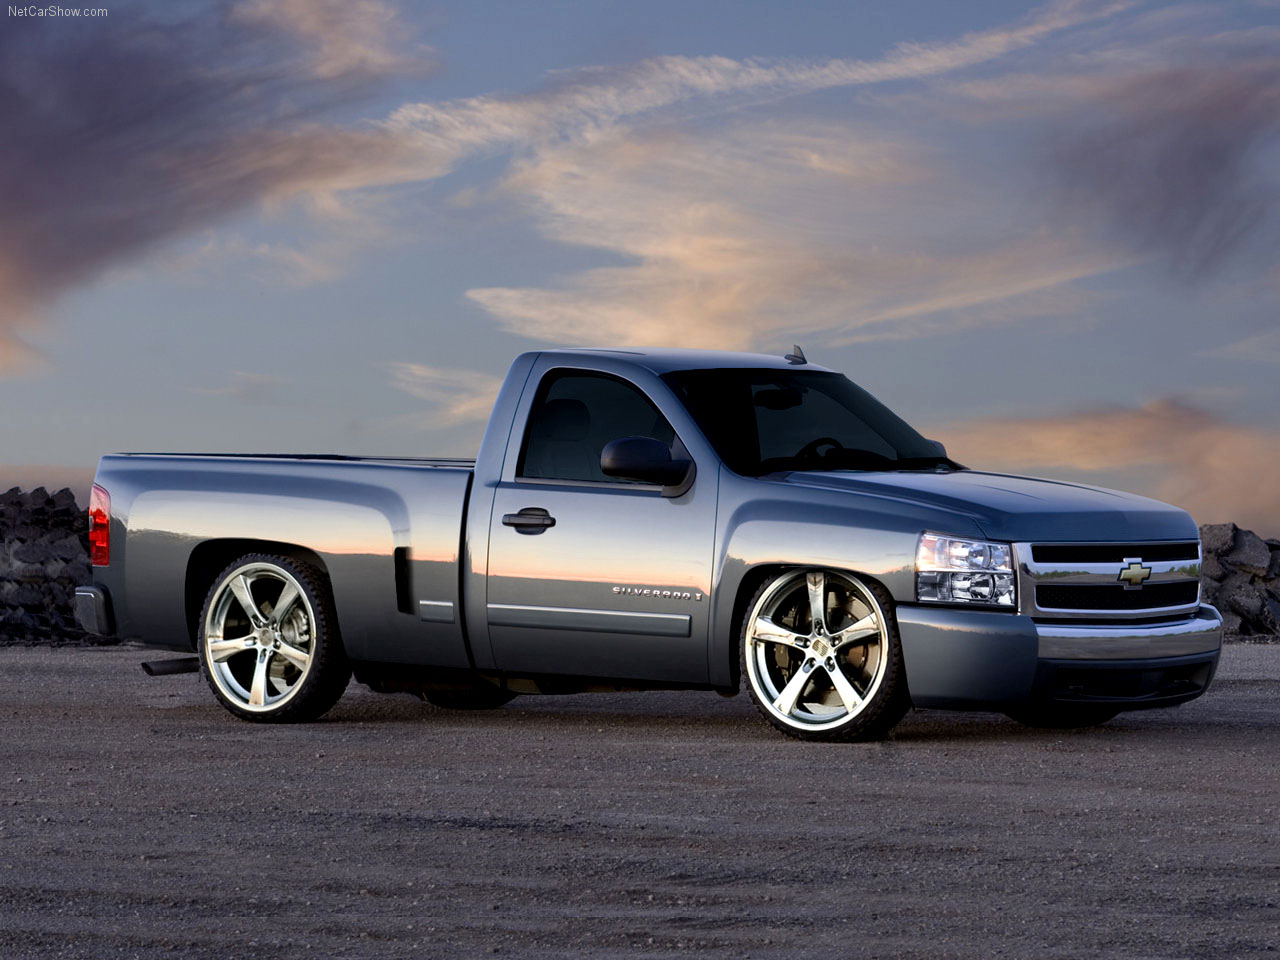 Free Download Chevy Truck Wallpapers 6625 Hd Wallpapers In Cars Imagescicom 1280x960 For Your Desktop Mobile Tablet Explore 44 Chevy Truck Wallpaper Gm Cars For Background Wallpaper Custom Truck Wallpaper Chevy Wallpaper